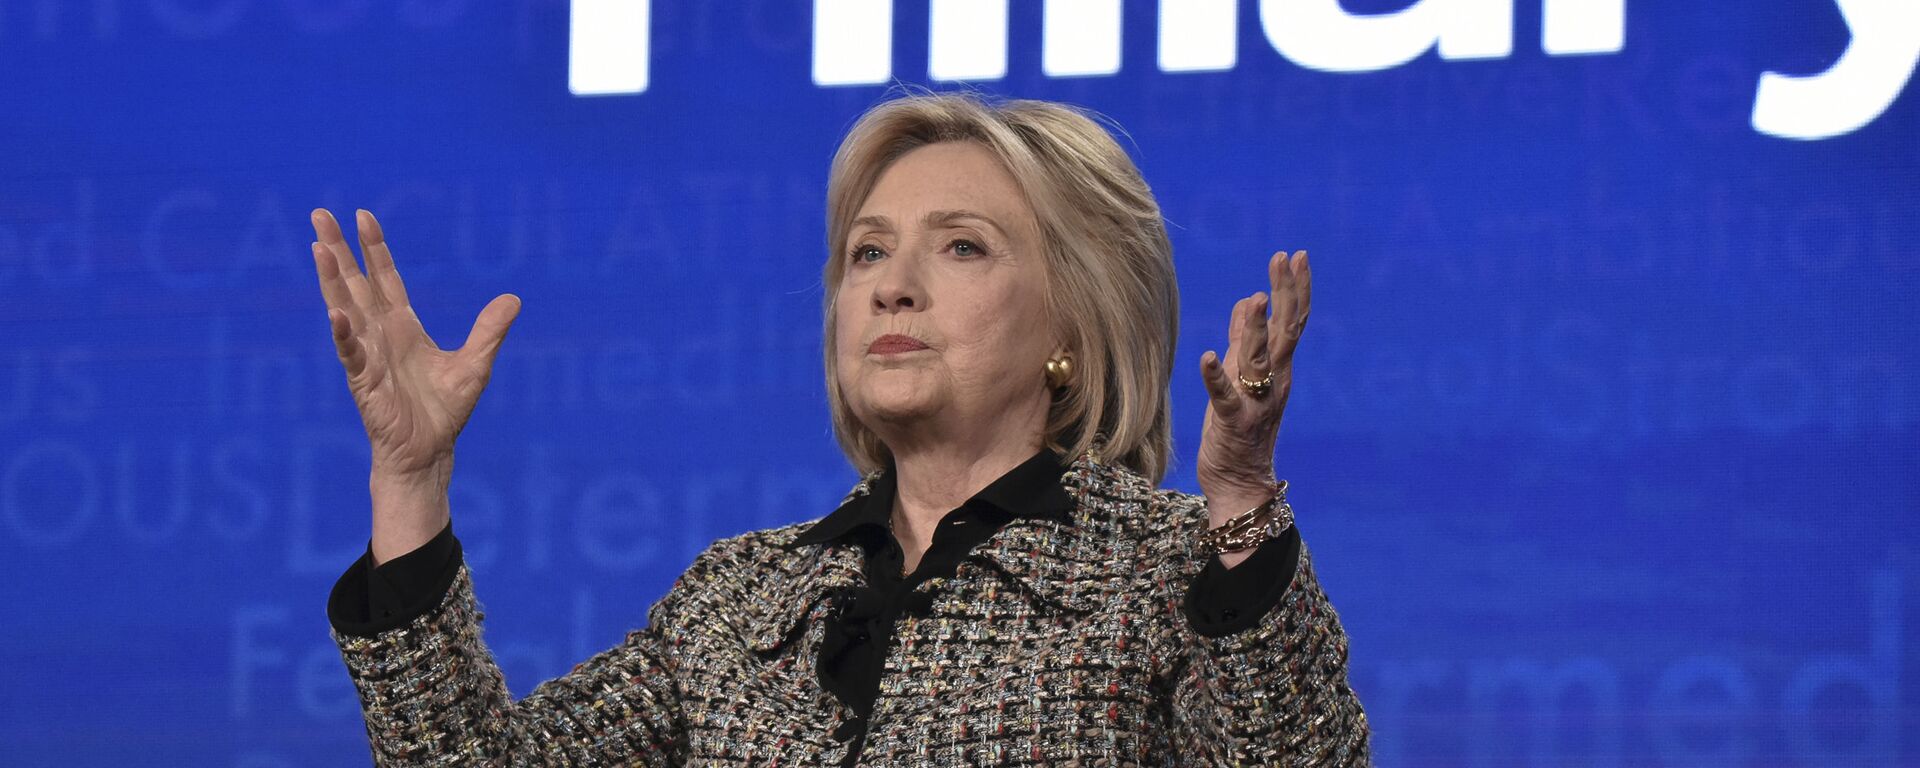 Hillary Clinton participates in the Hulu Hillary panel during the Winter 2020 Television Critics Association Press Tour, on Friday, Jan. 17, 2020, in Pasadena, Calif - Sputnik International, 1920, 15.02.2022